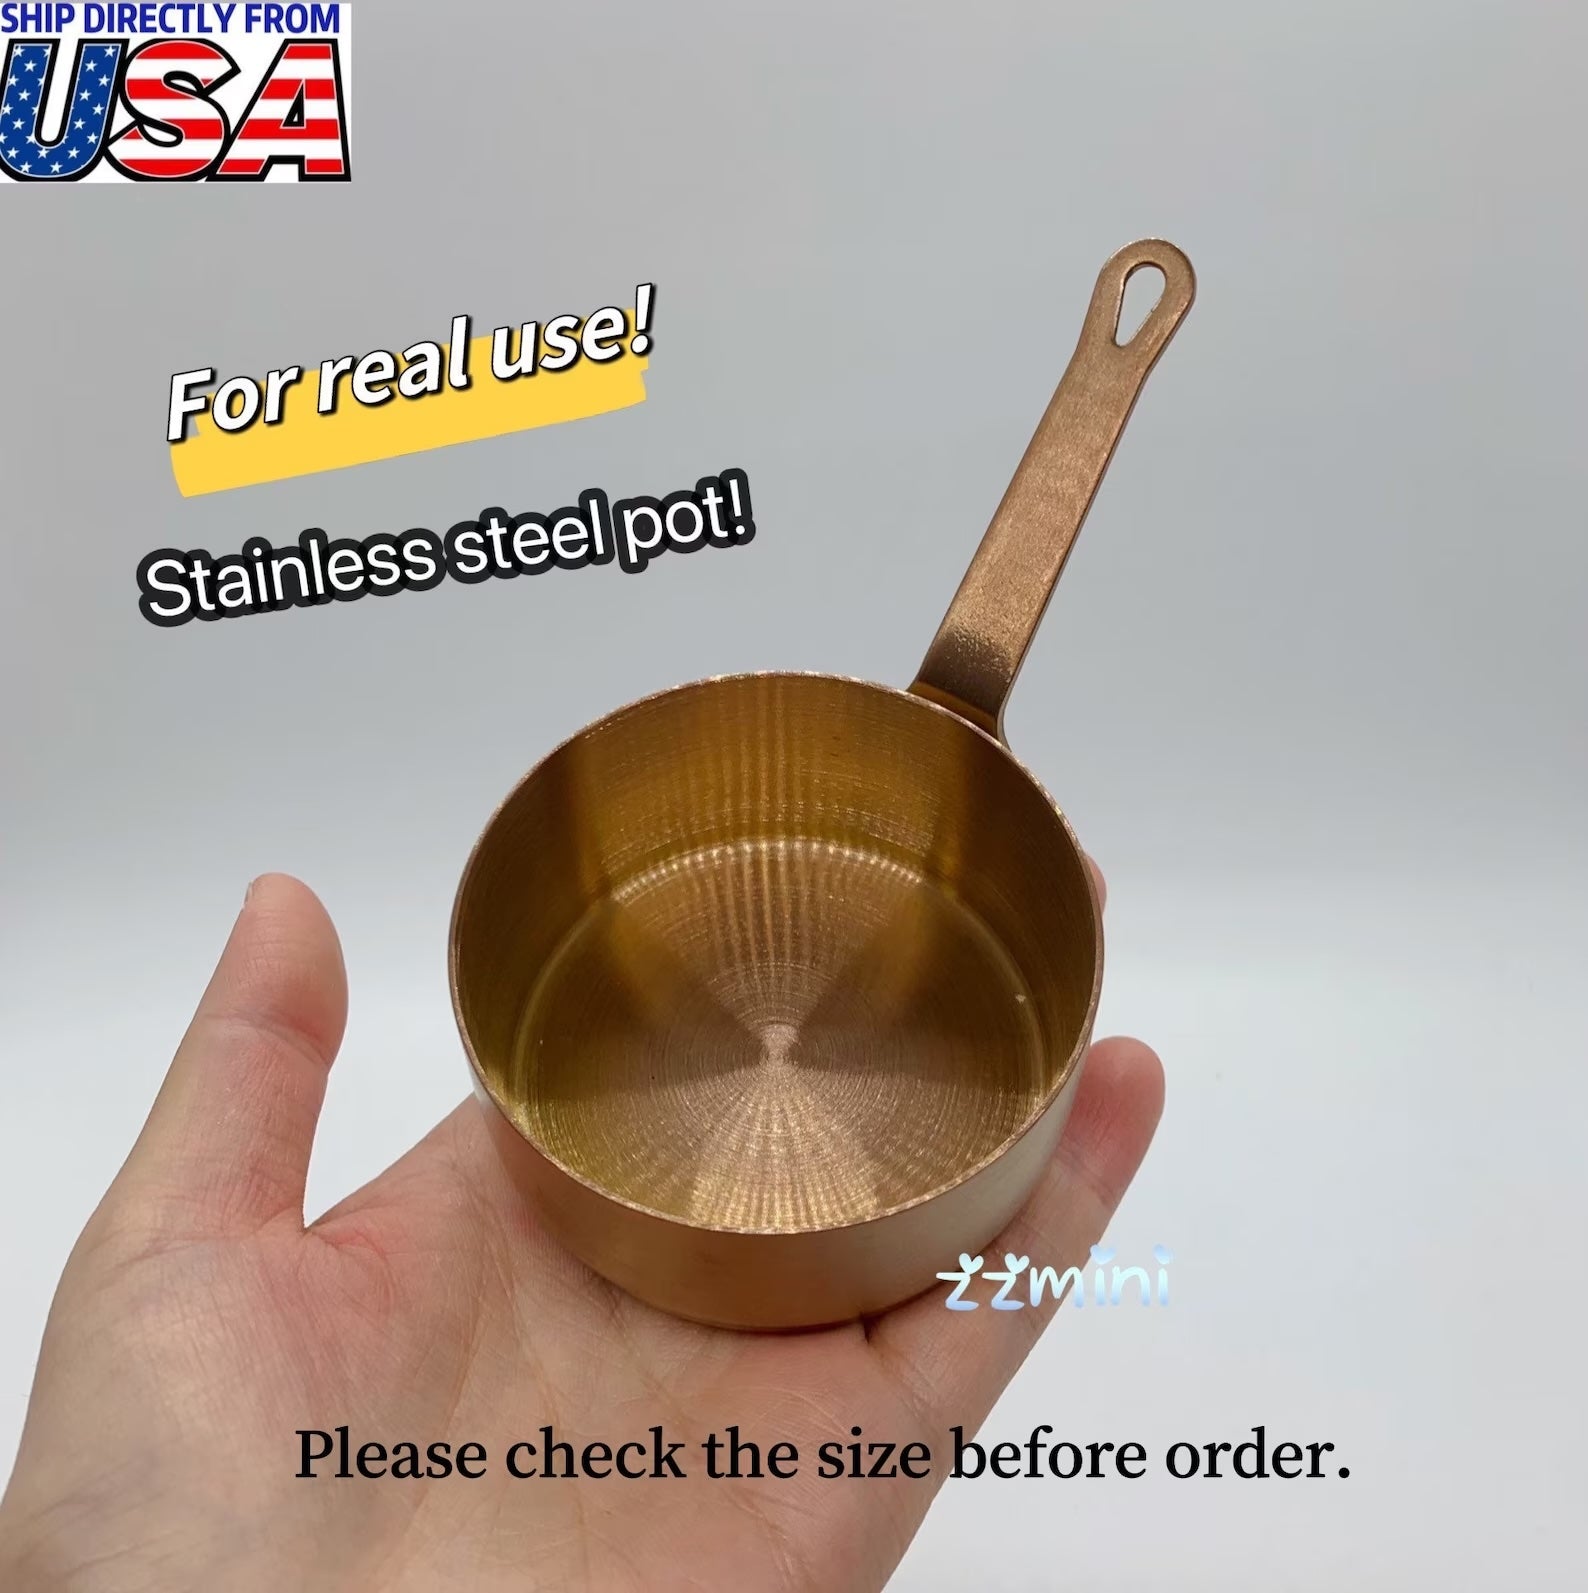 Dollhouse Miniature Stainless Steel Golden Pot Round Pan With Handle Cooking Supply Can Cook Real Mini Food Or Play Kitchen Toy